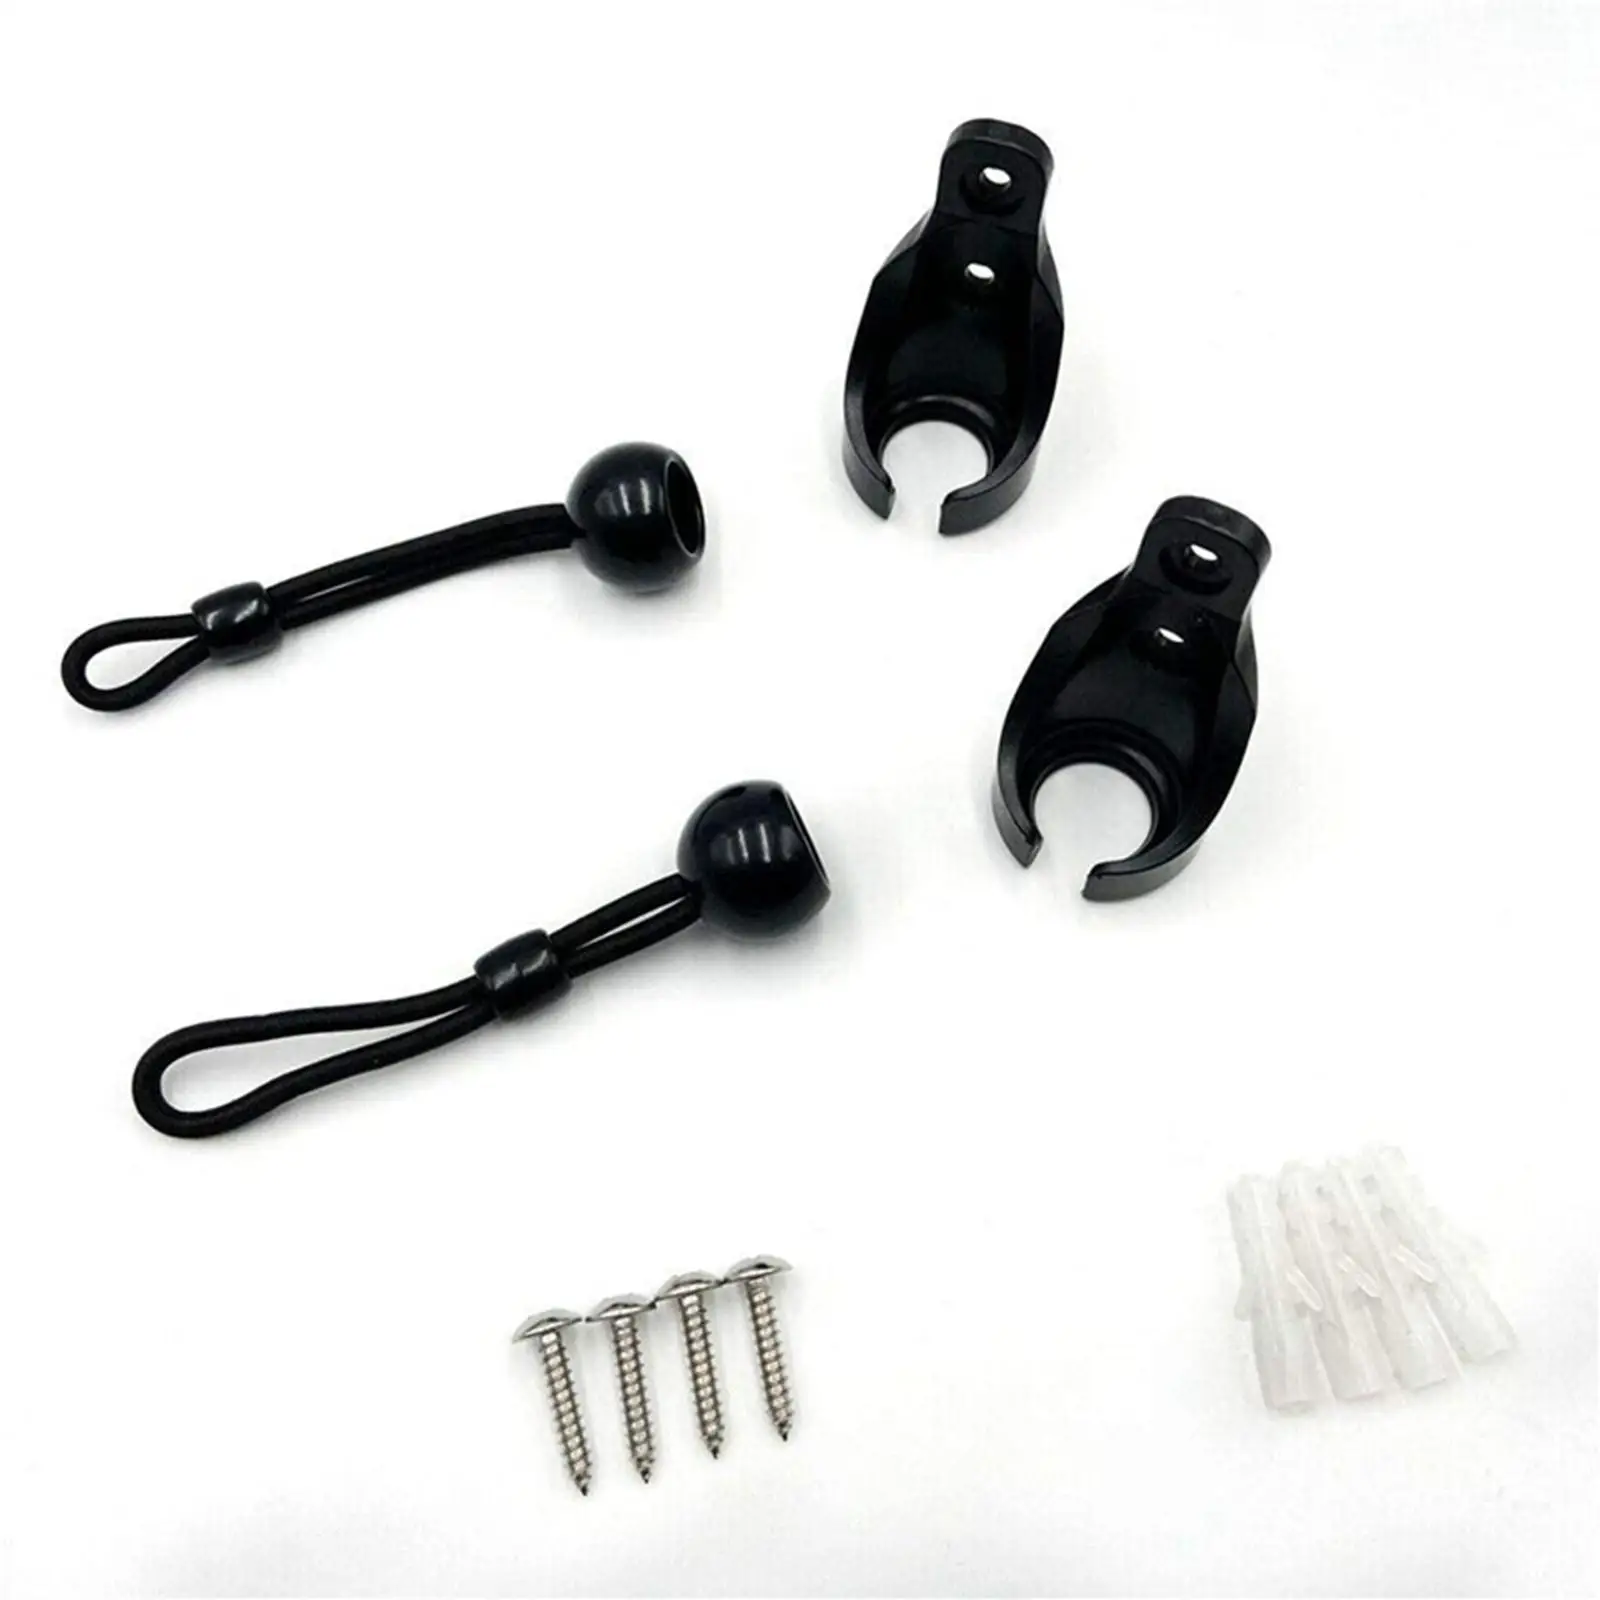 Bungee End cap set Spare Parts Repair Easy to Install for Blackout